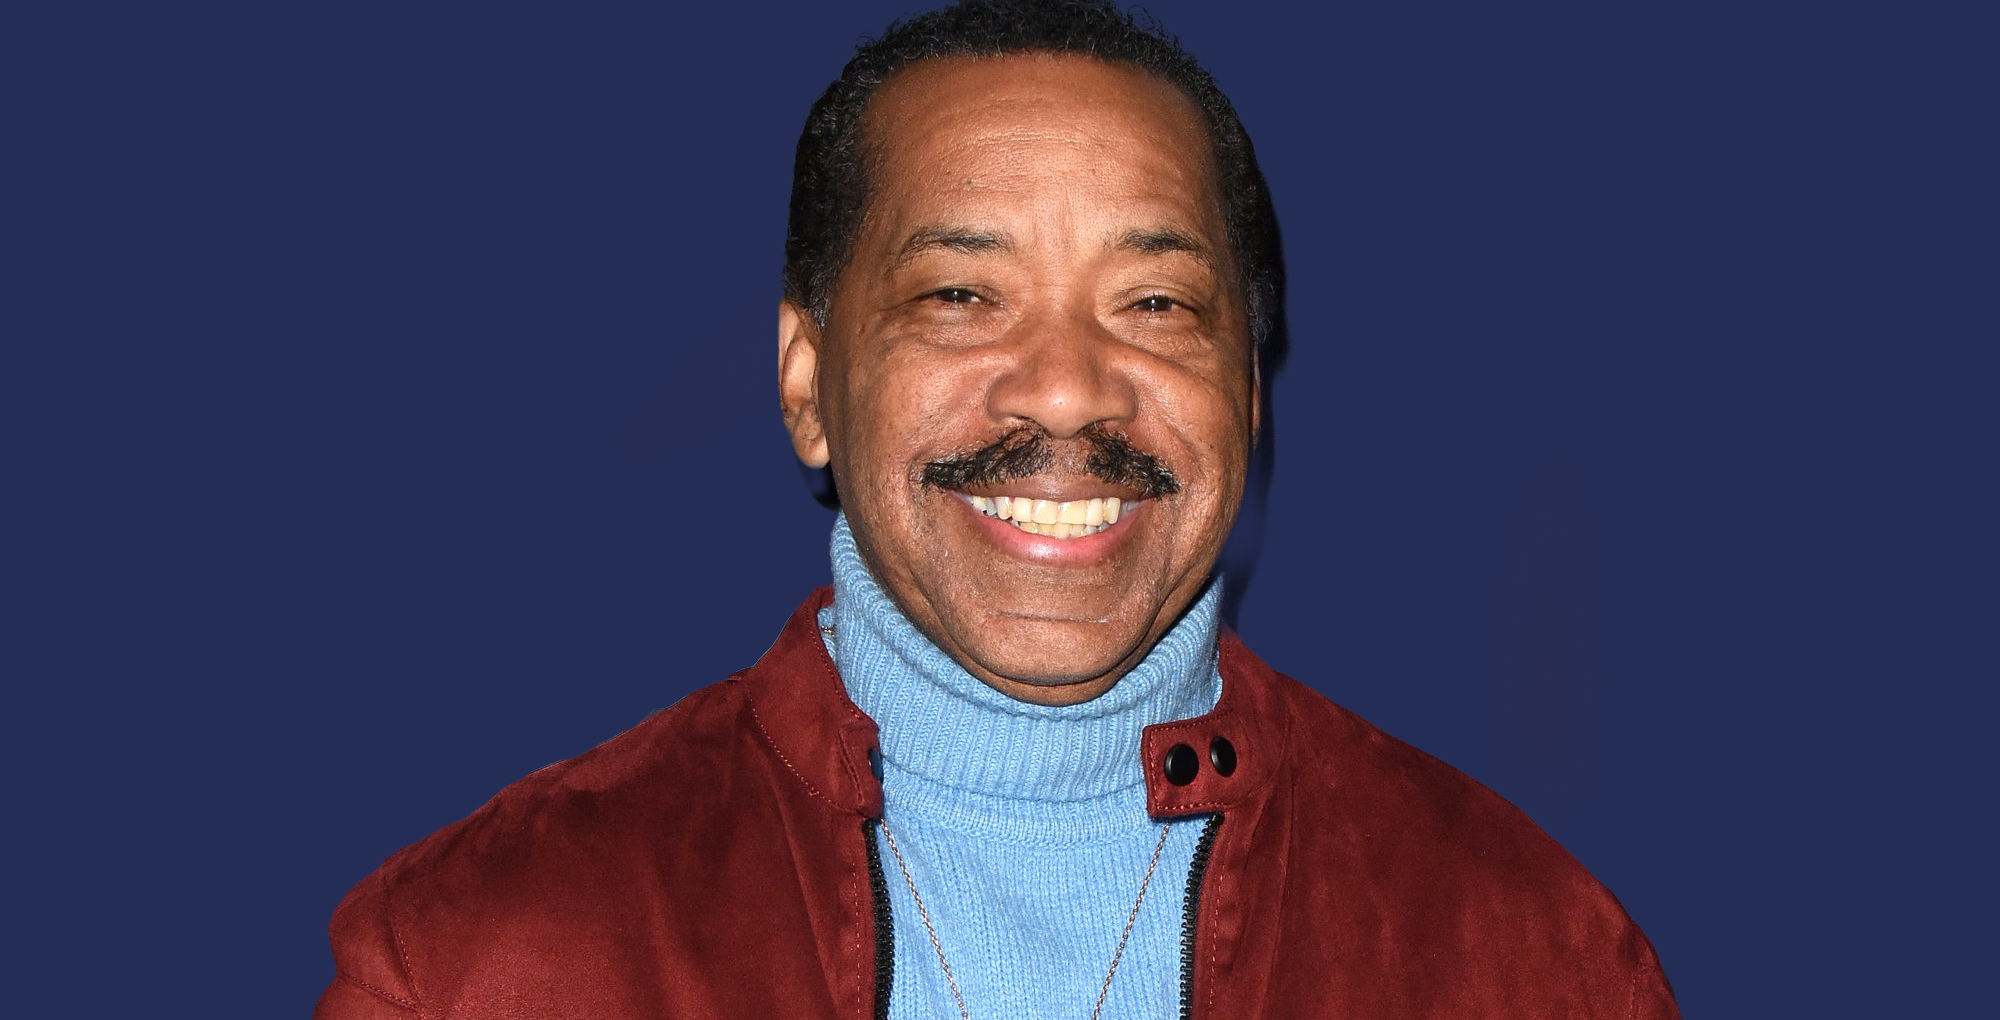 obba babatundé played julius avant on the bold and the beautiful.